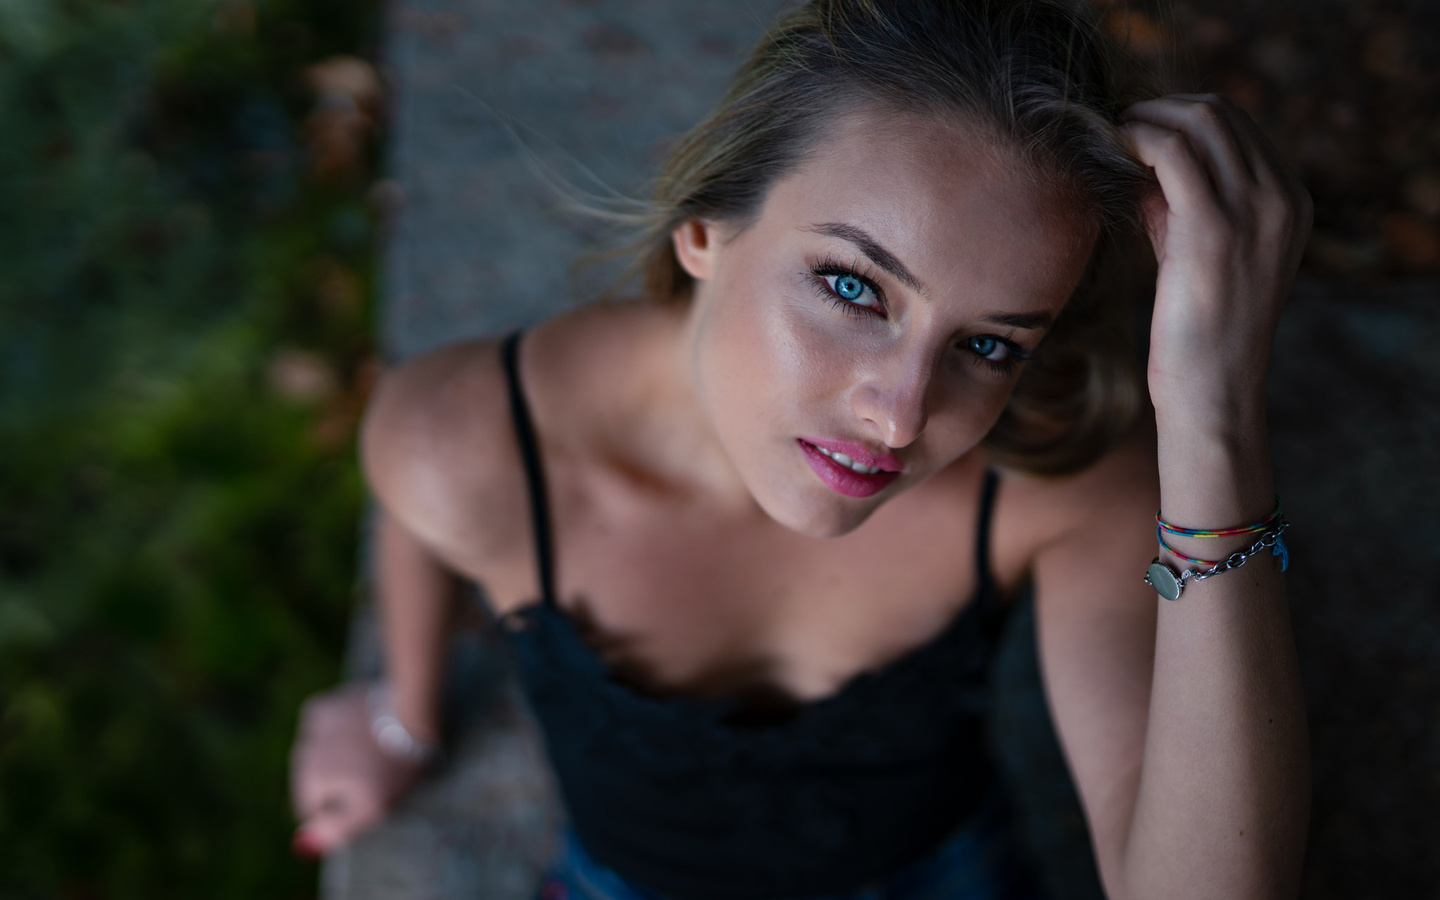 women, marco squassina, portrait, blue eyes, red nails